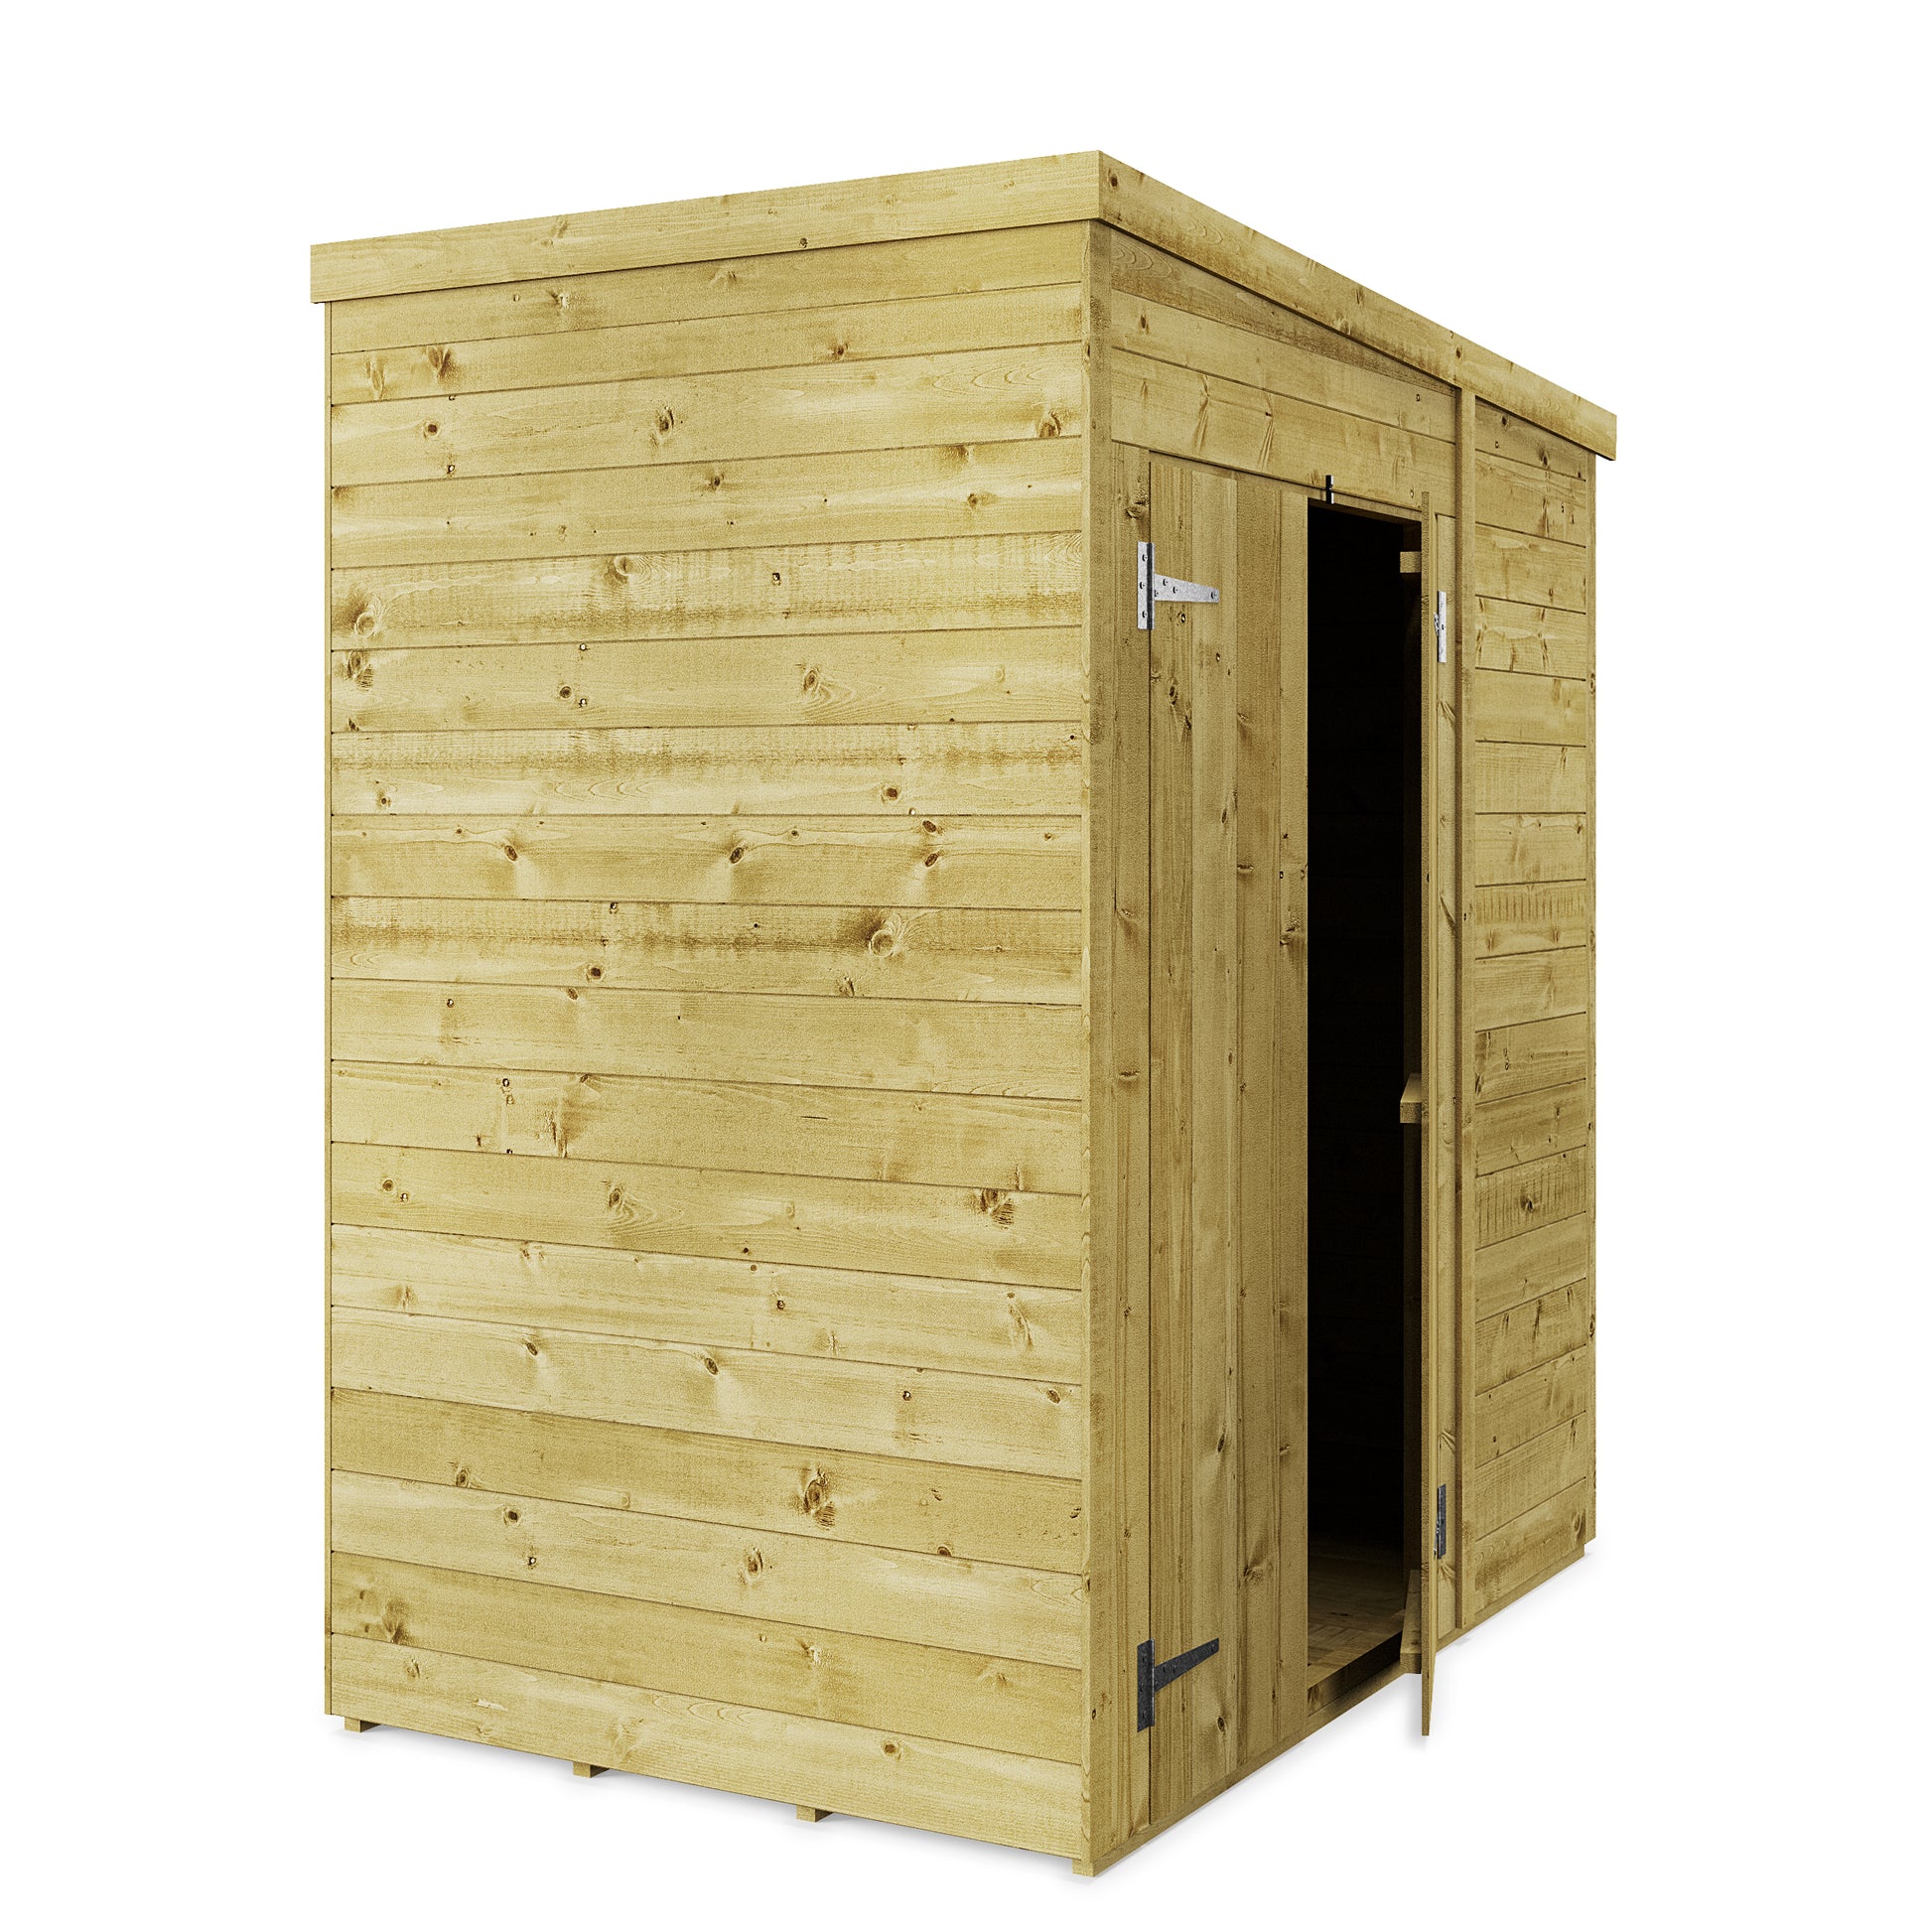 Store More 4 x 6 Tongue and Groove Pent Shed - Premium Garden